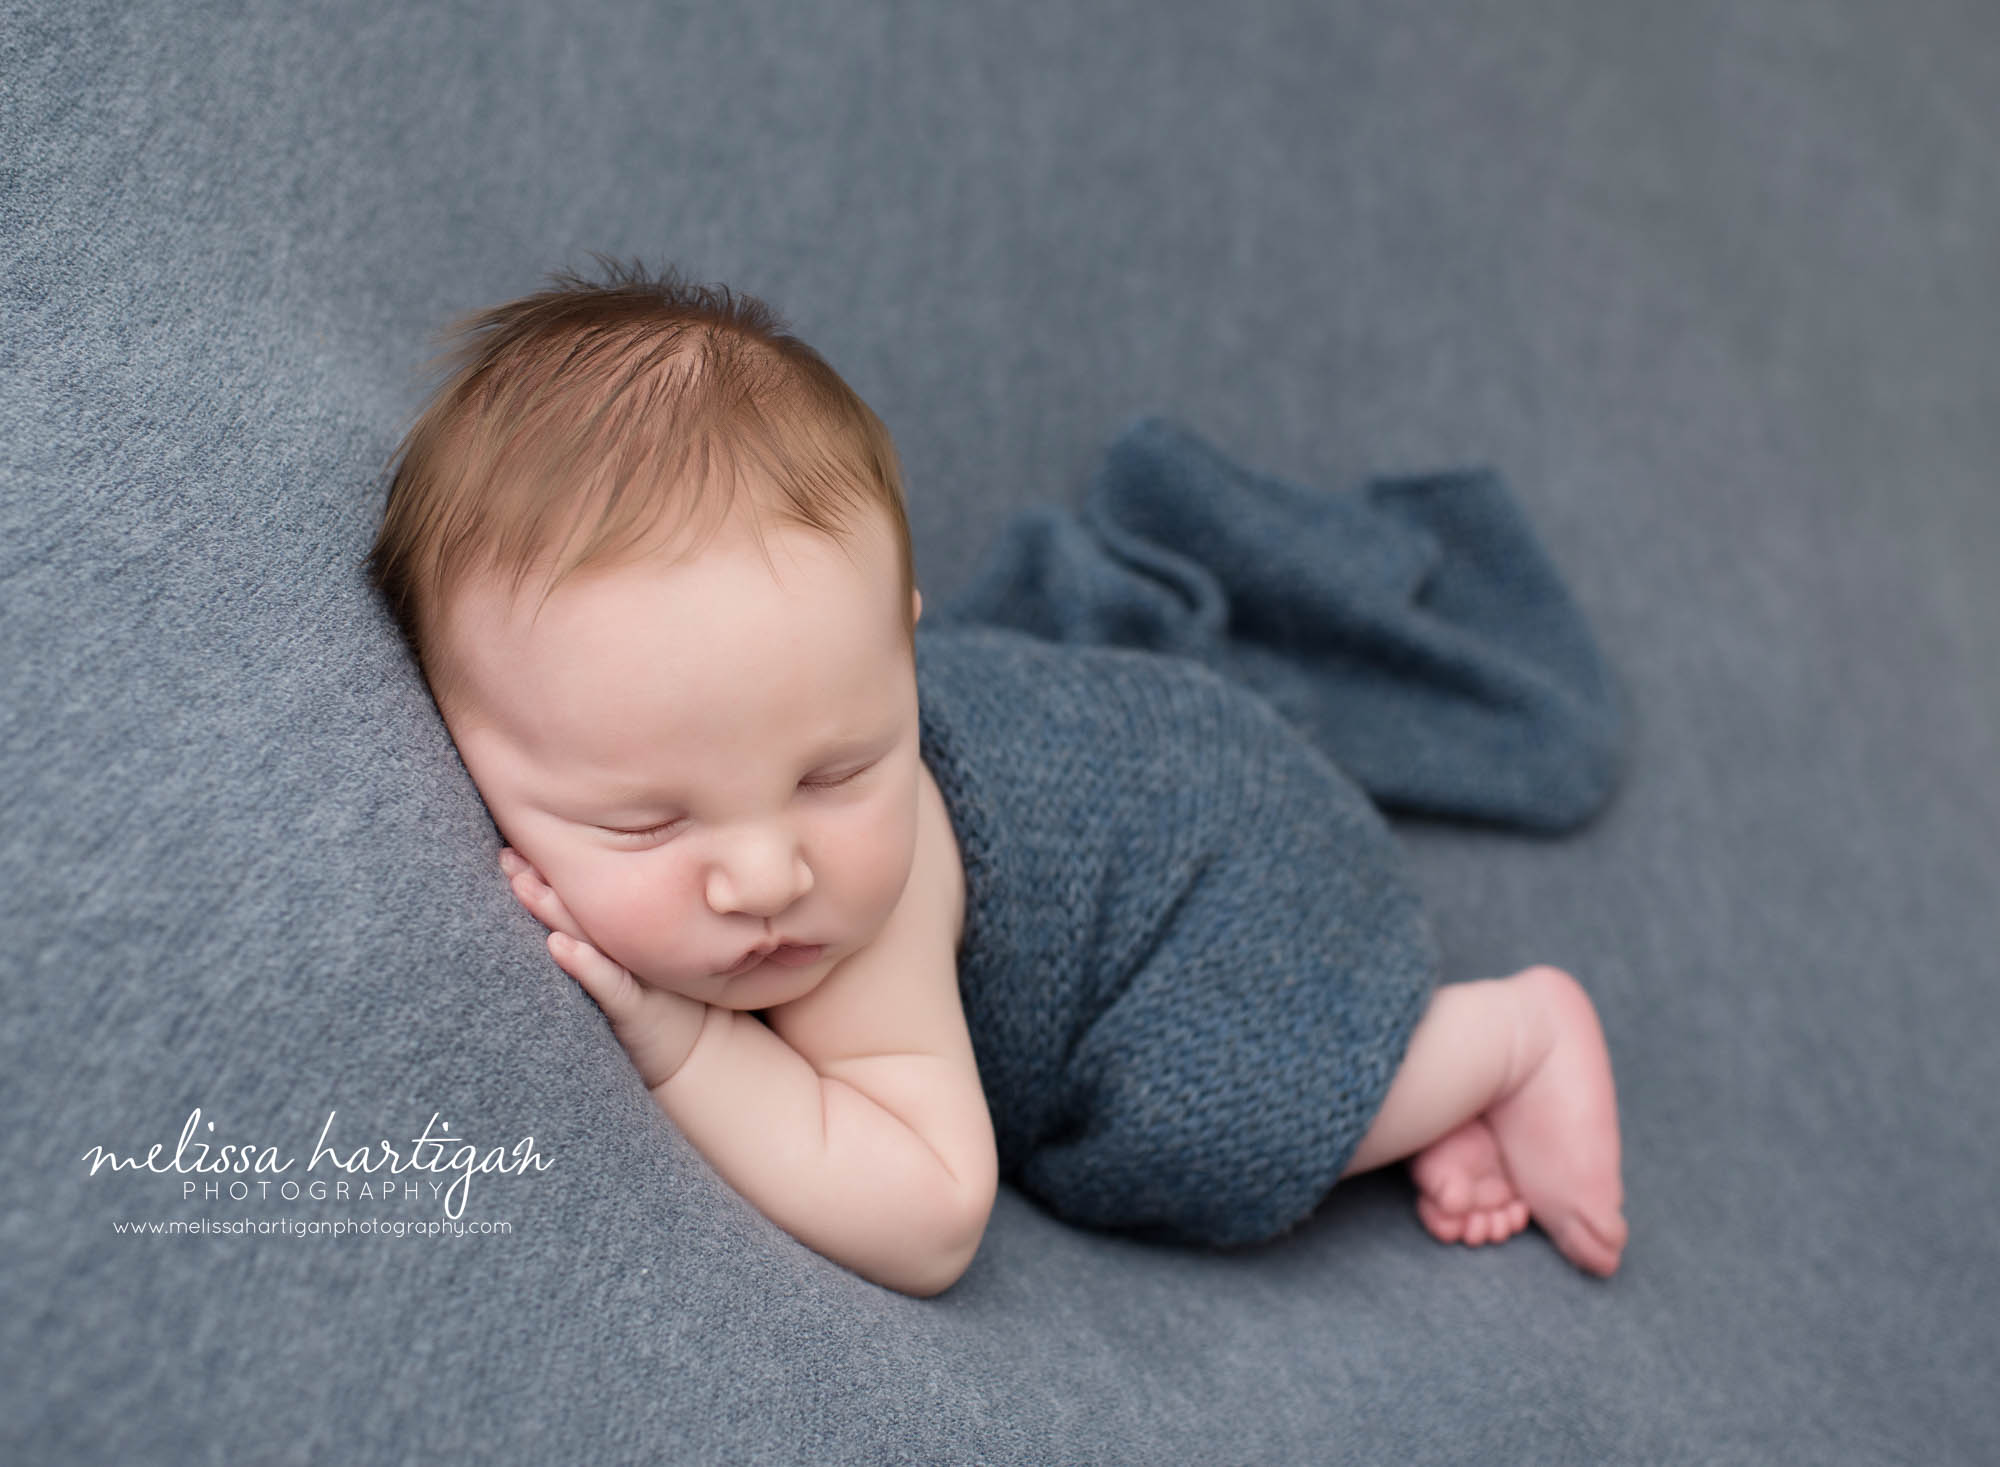 baby boy posed on wide with blue knitted wrap around him